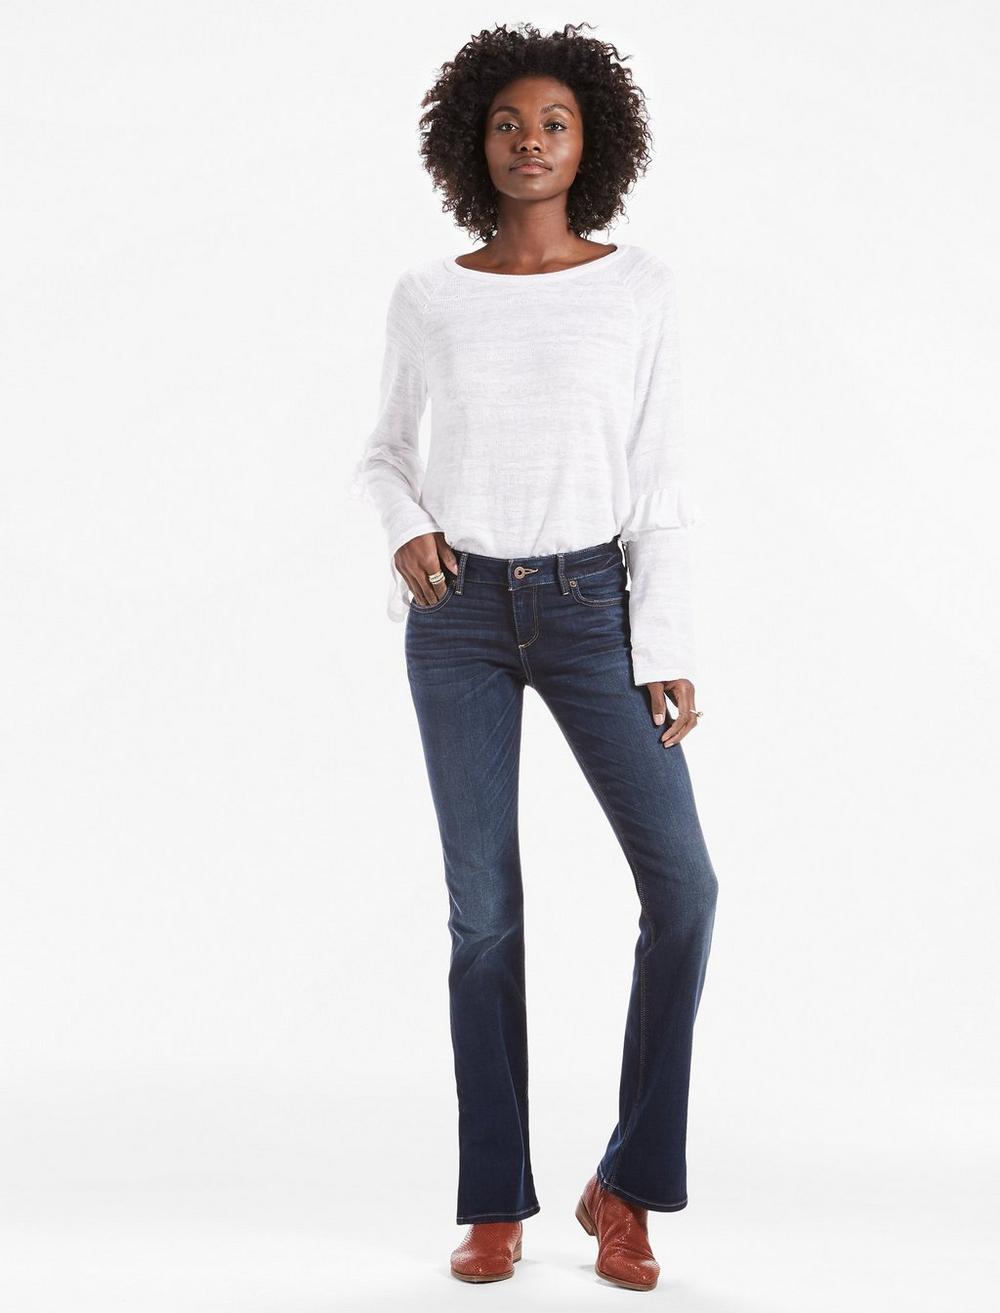 LOLITA BOOTCUT JEAN WITH SIDE SLIT | Lucky Brand